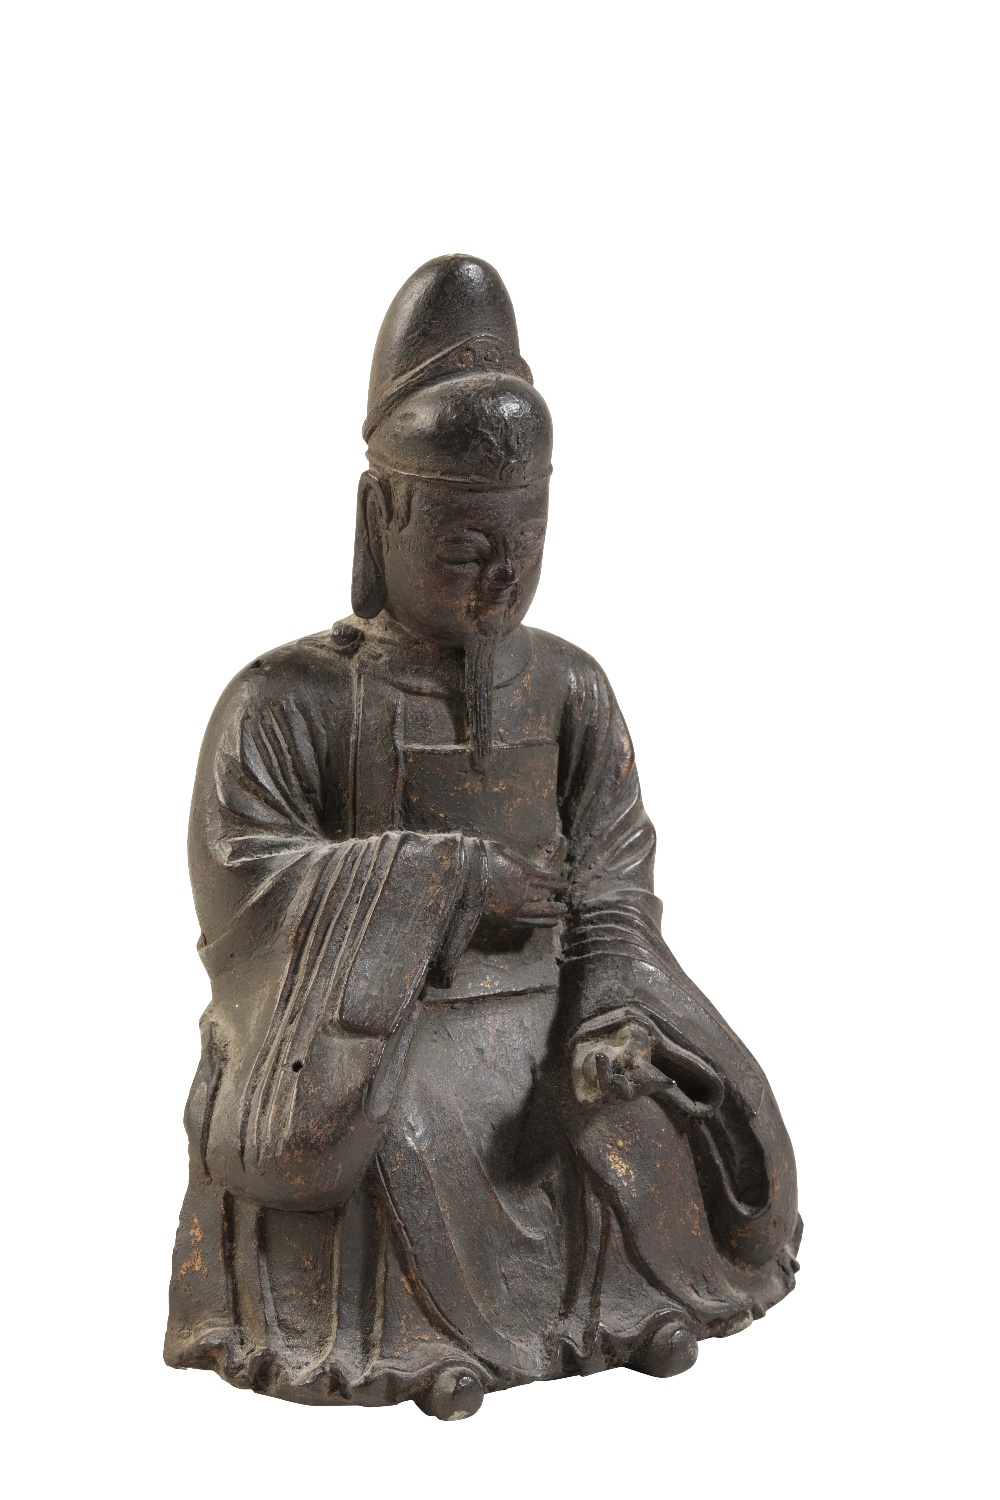 GILT-BRONZE FIGURE OF A DAOIST IMMORTAL, LATE MING DYNASTY - Image 2 of 3